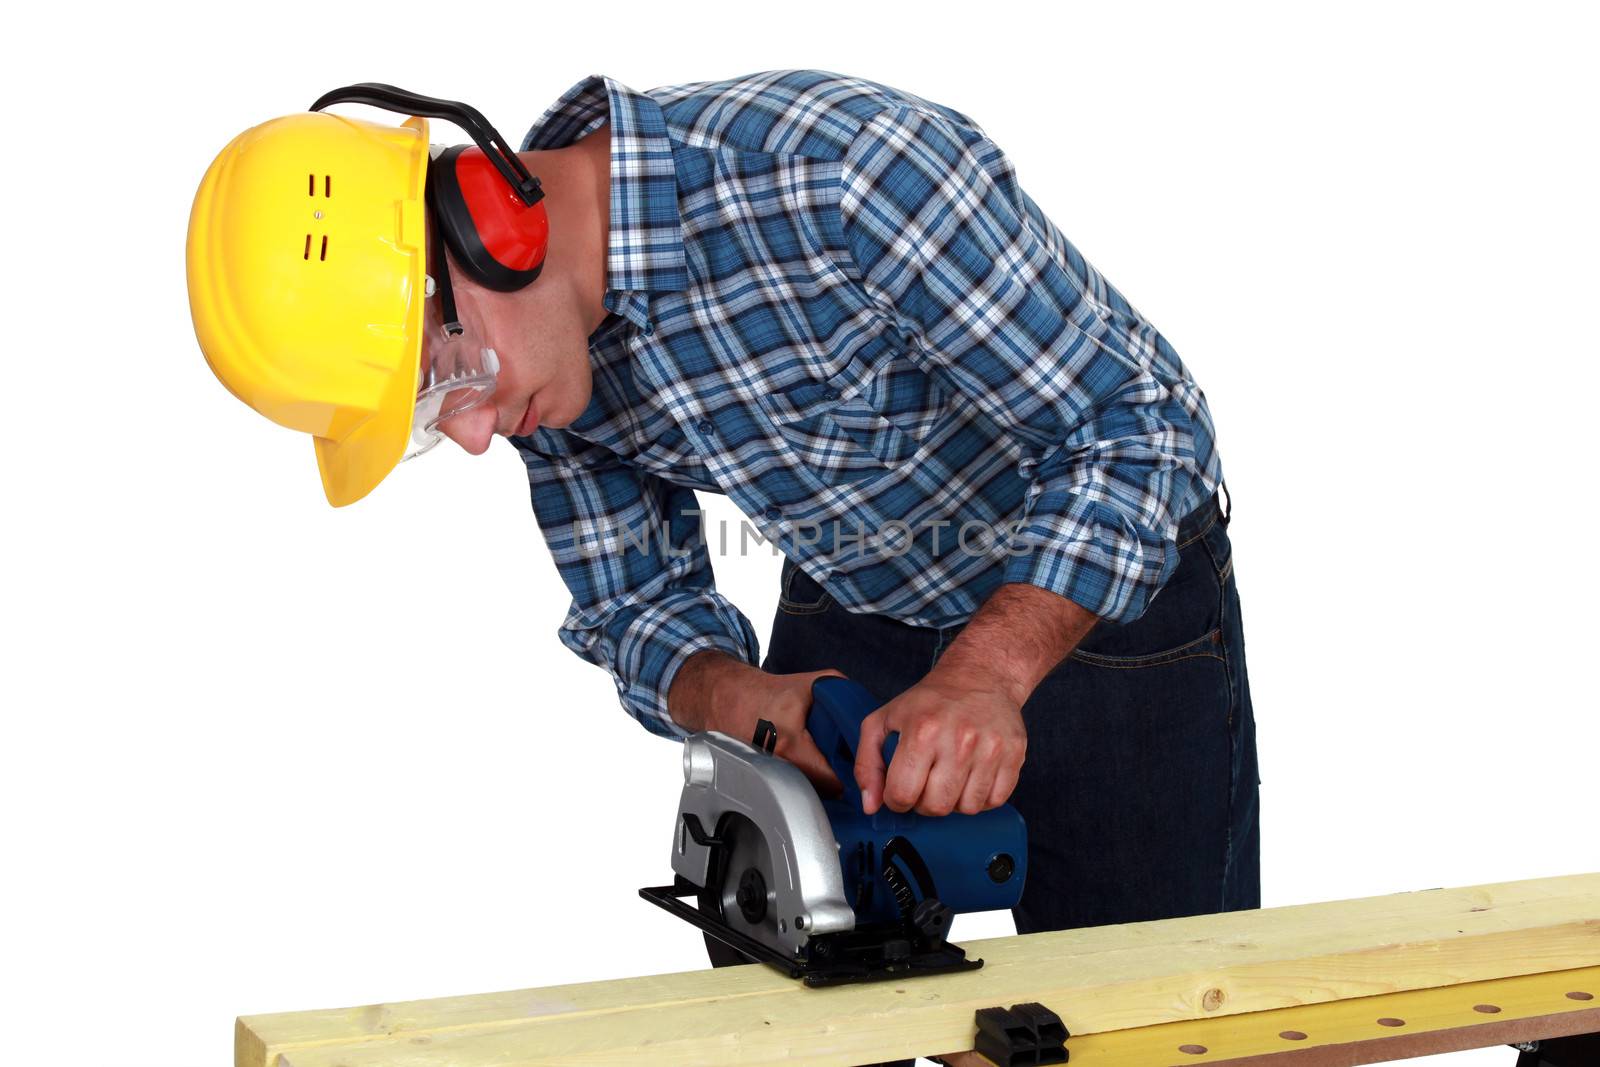 Carpenter using band saw by phovoir